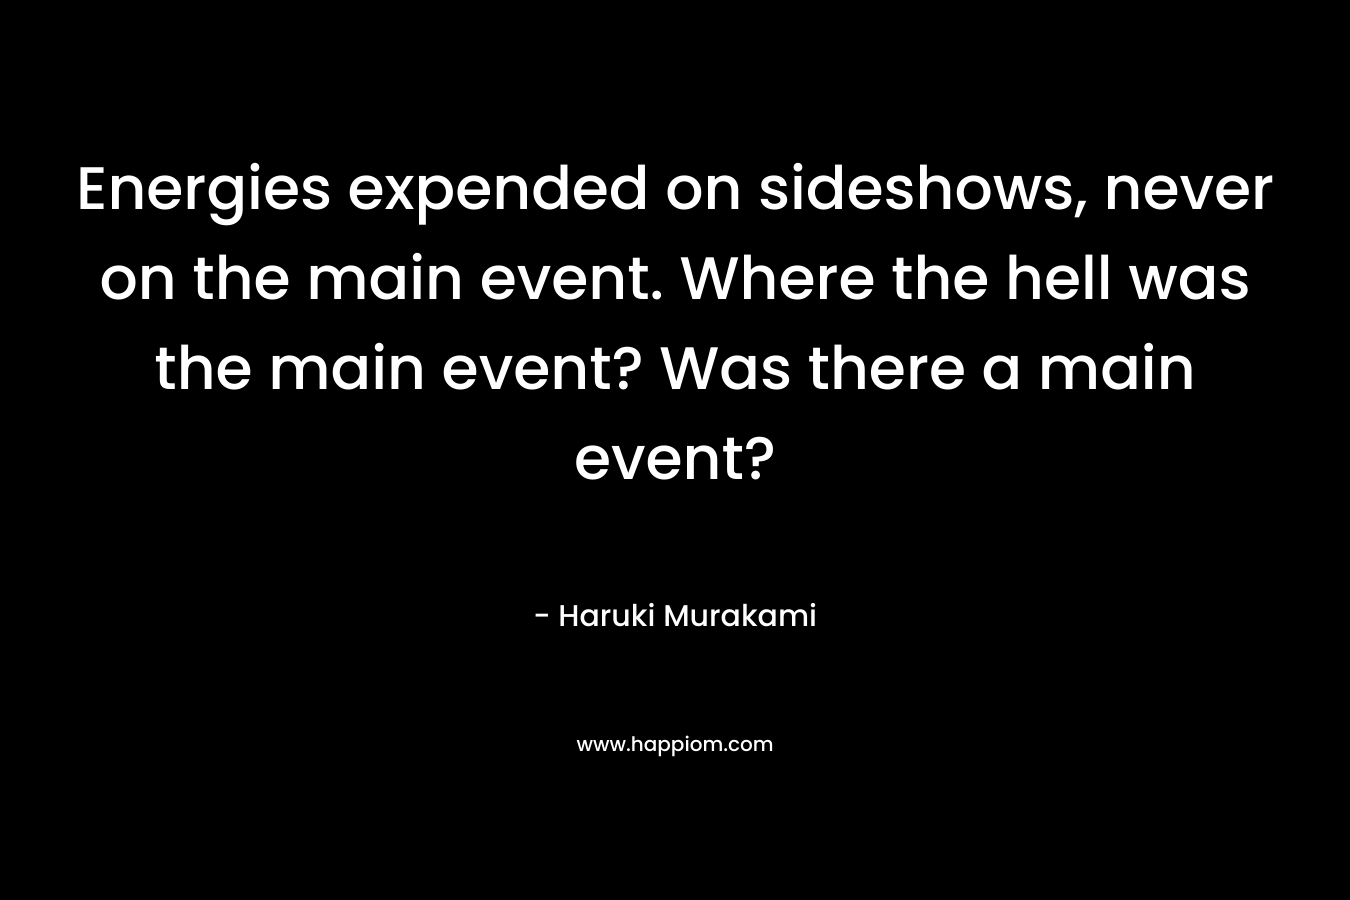 Energies expended on sideshows, never on the main event. Where the hell was the main event? Was there a main event? – Haruki Murakami